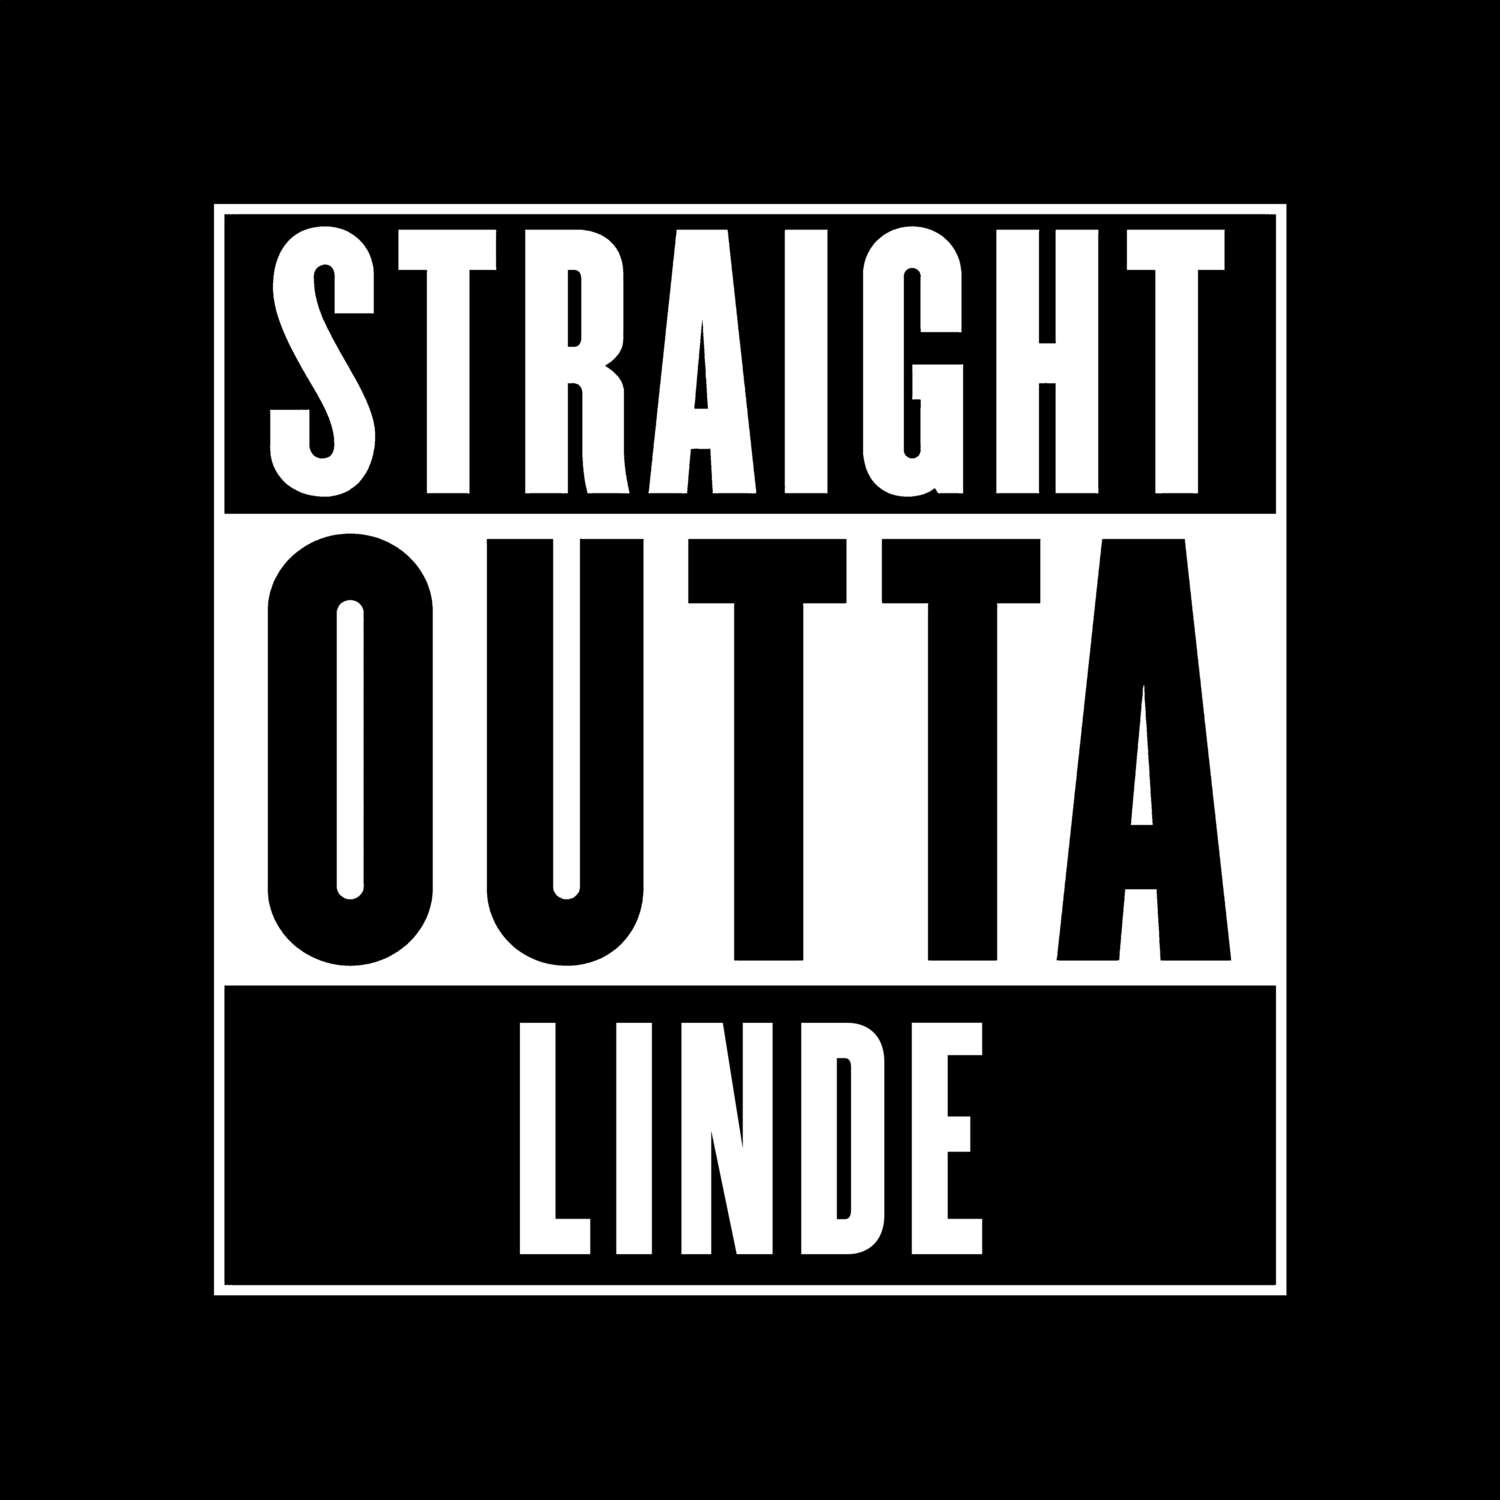 Linde T-Shirt »Straight Outta«